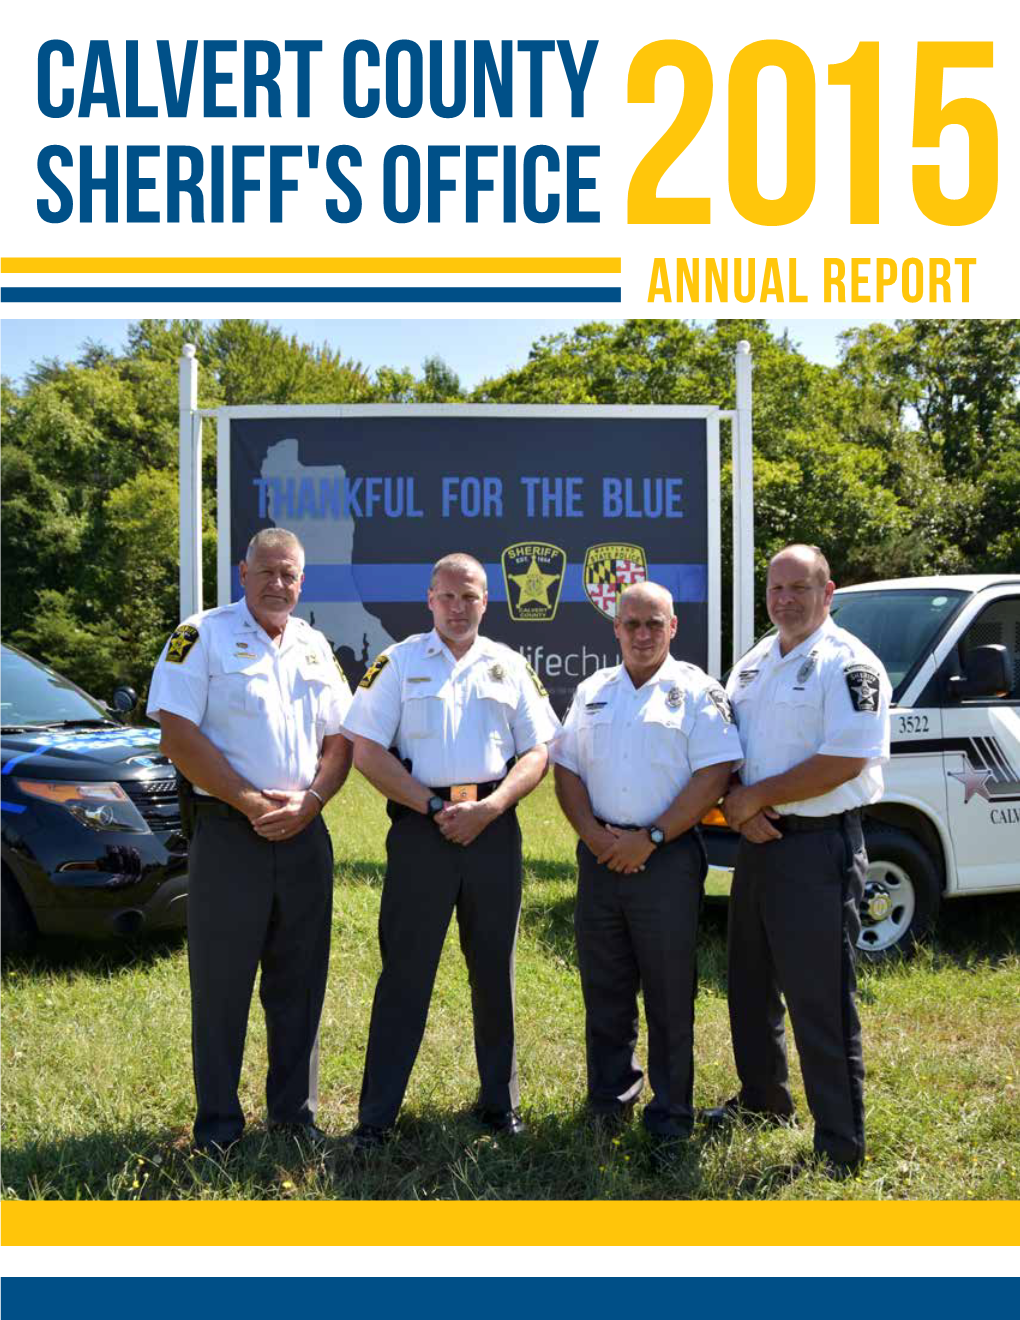 Calvert County Sheriff's Office2015 Annual Report